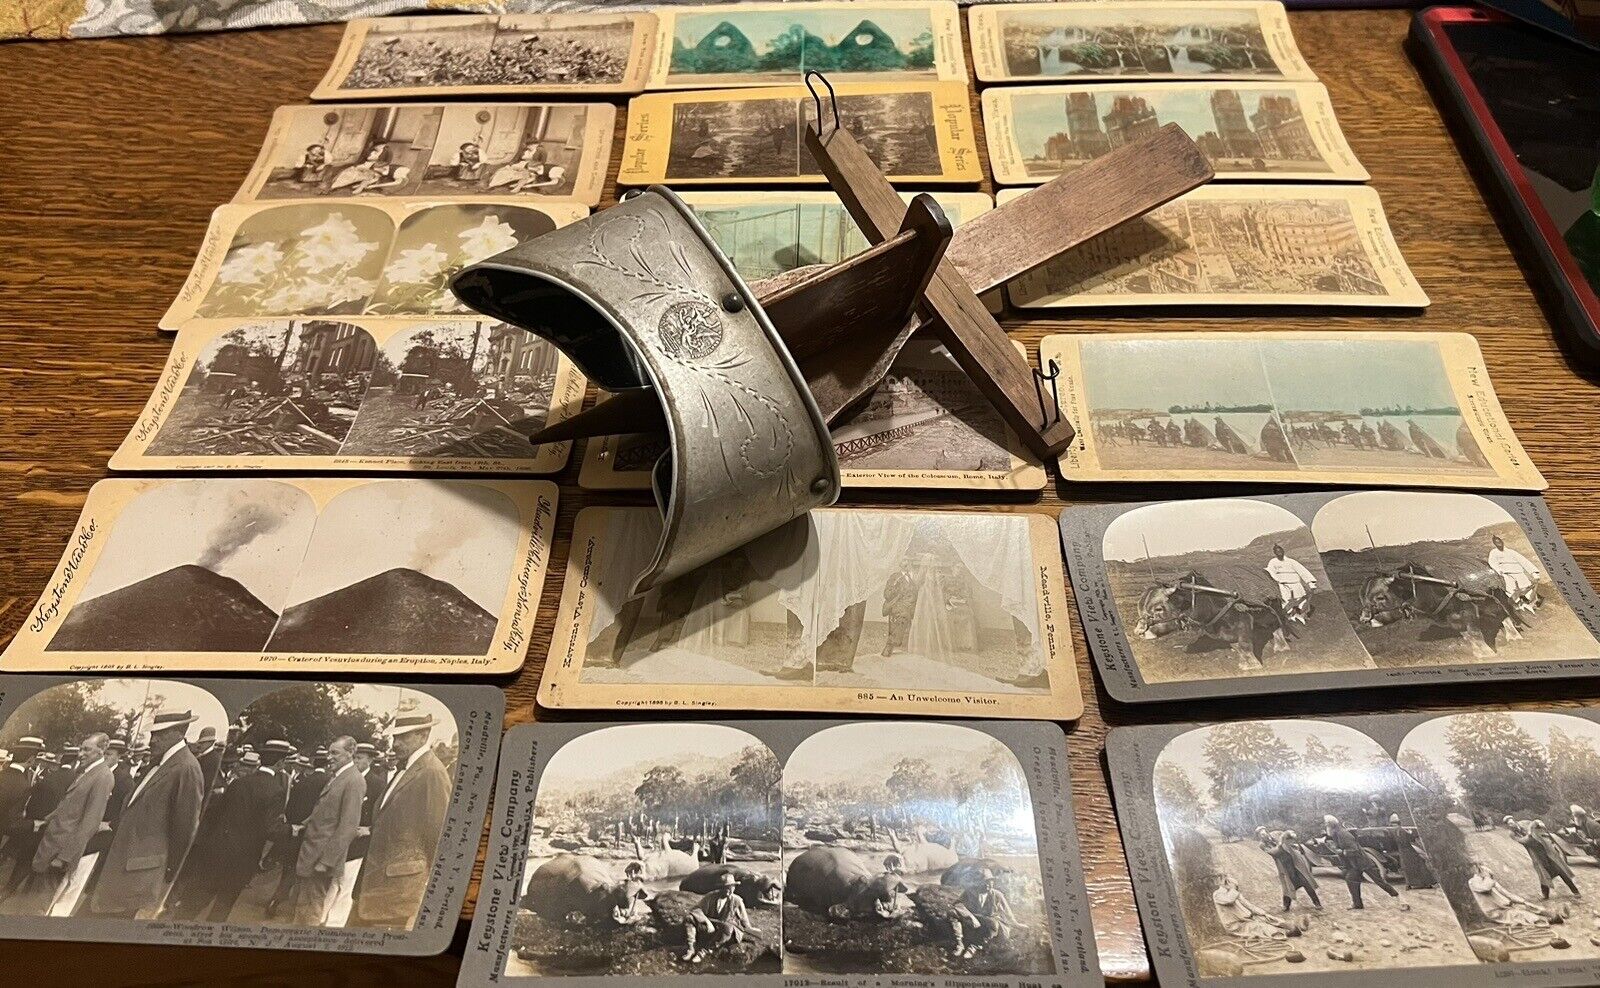 Exposition Universelle International 1900 With 18 Stereoscope Viewer Cards